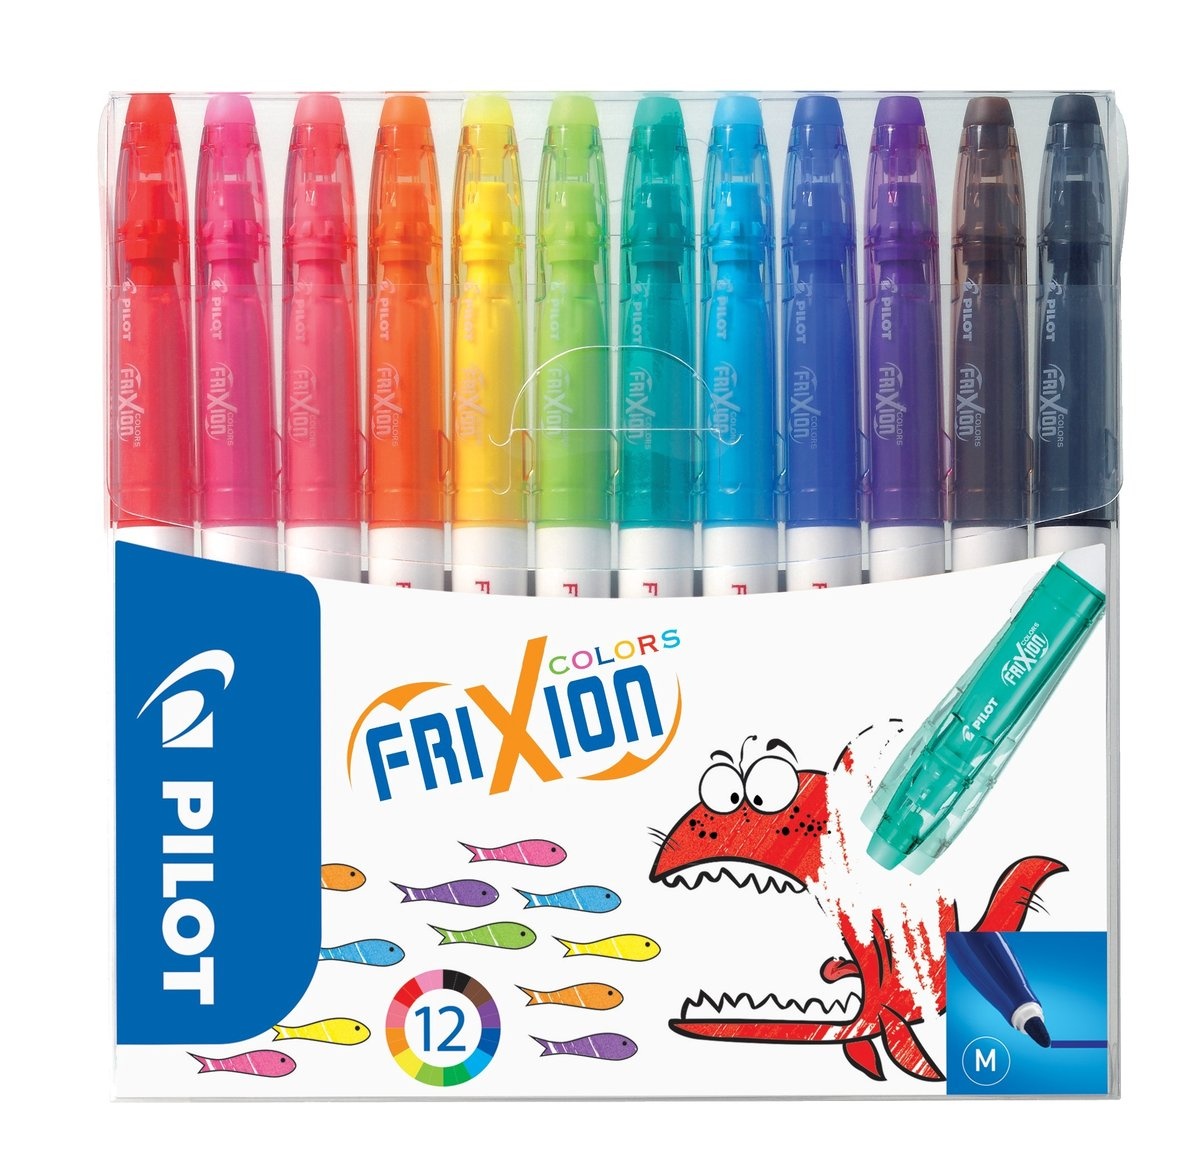 FriXion - FriXion Colors